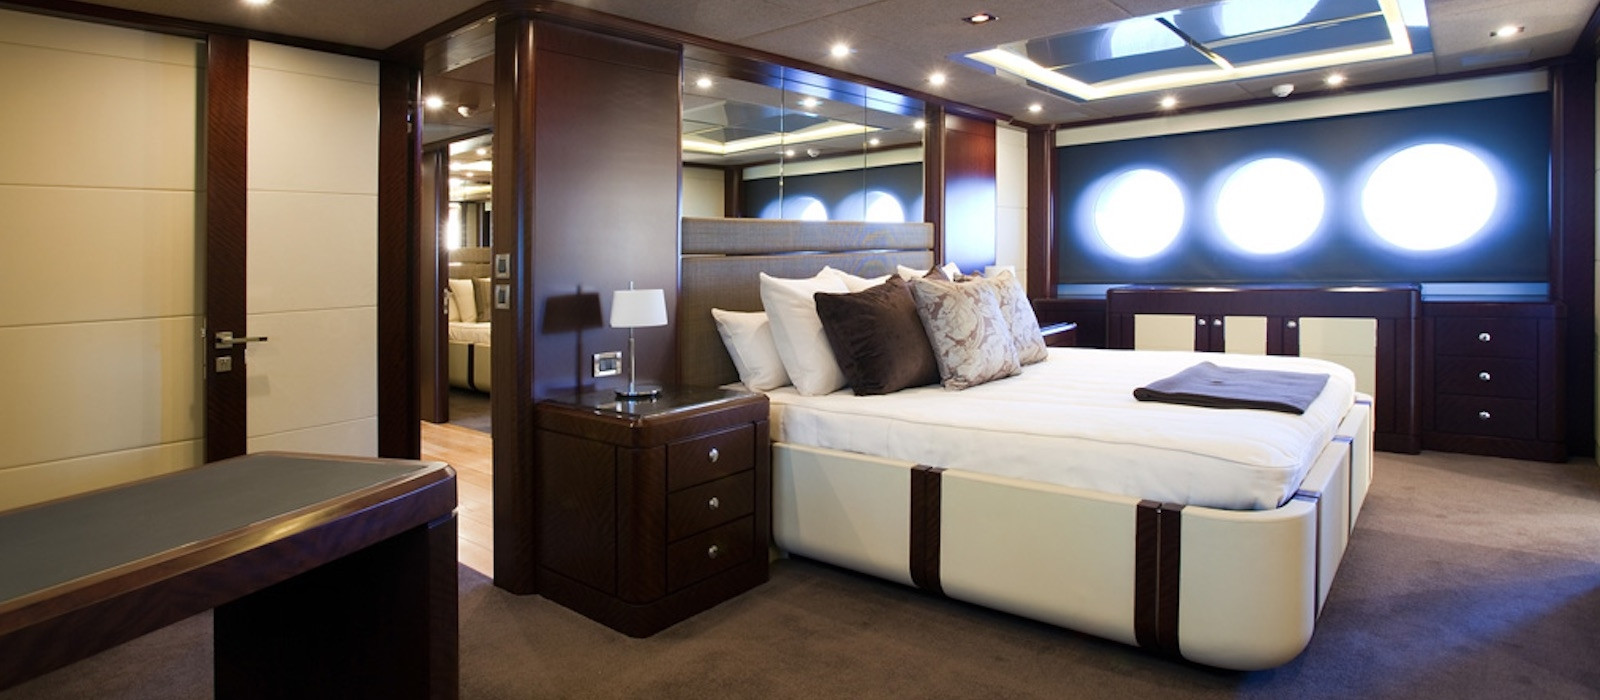 Master stateroom available on Quantum super yacht hire